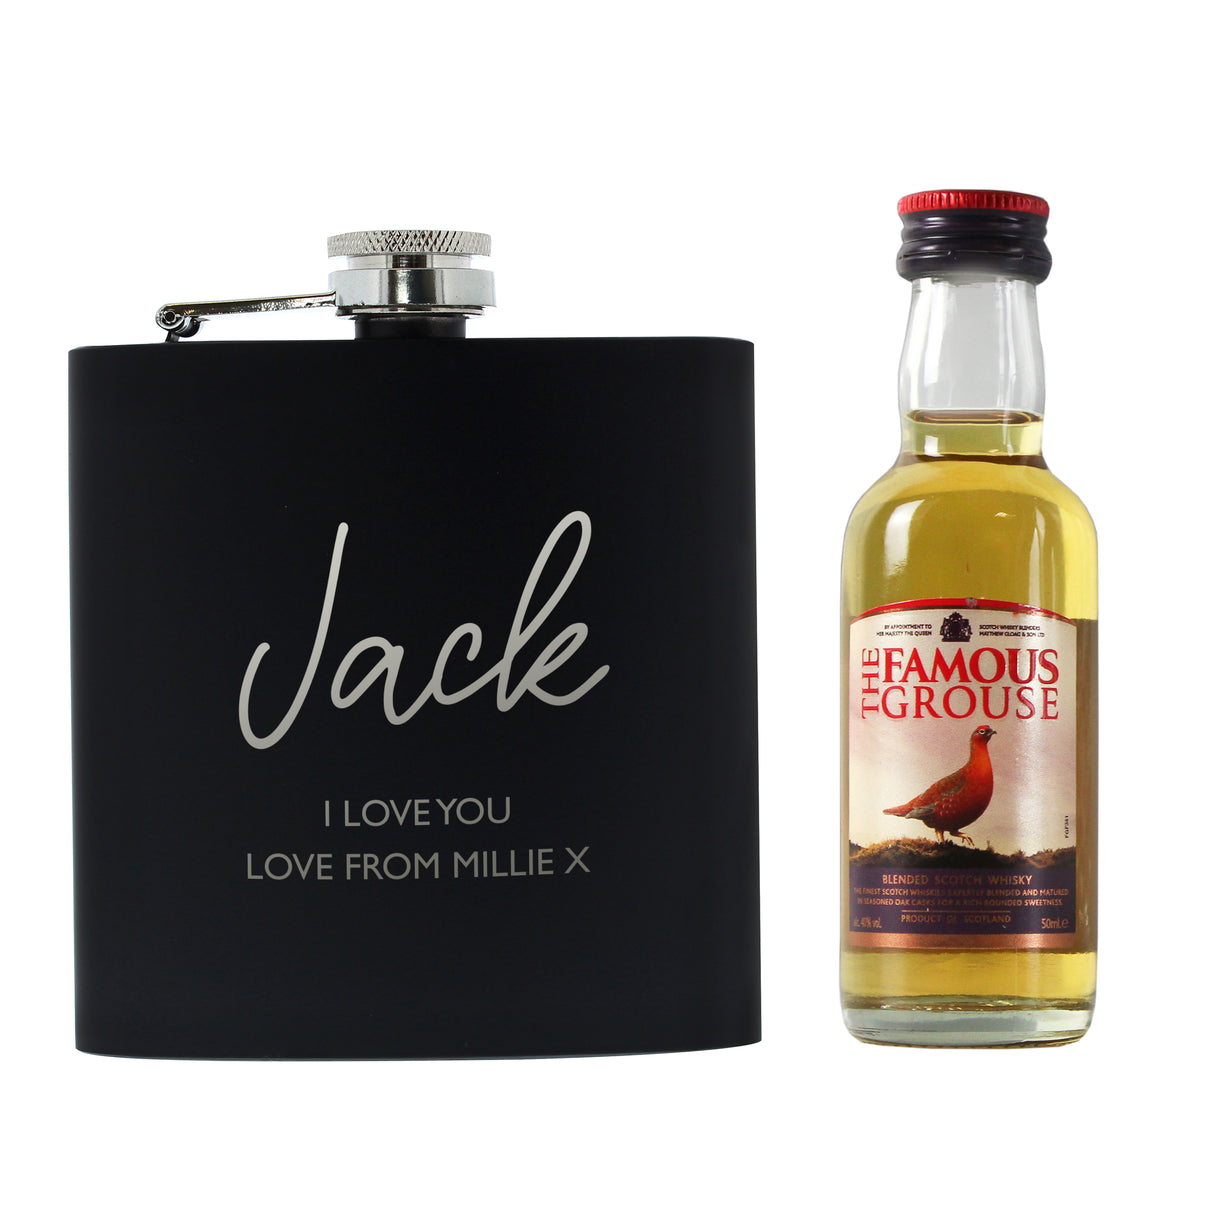 Hipflask and Whiskey Miniature Set - Gift Moments